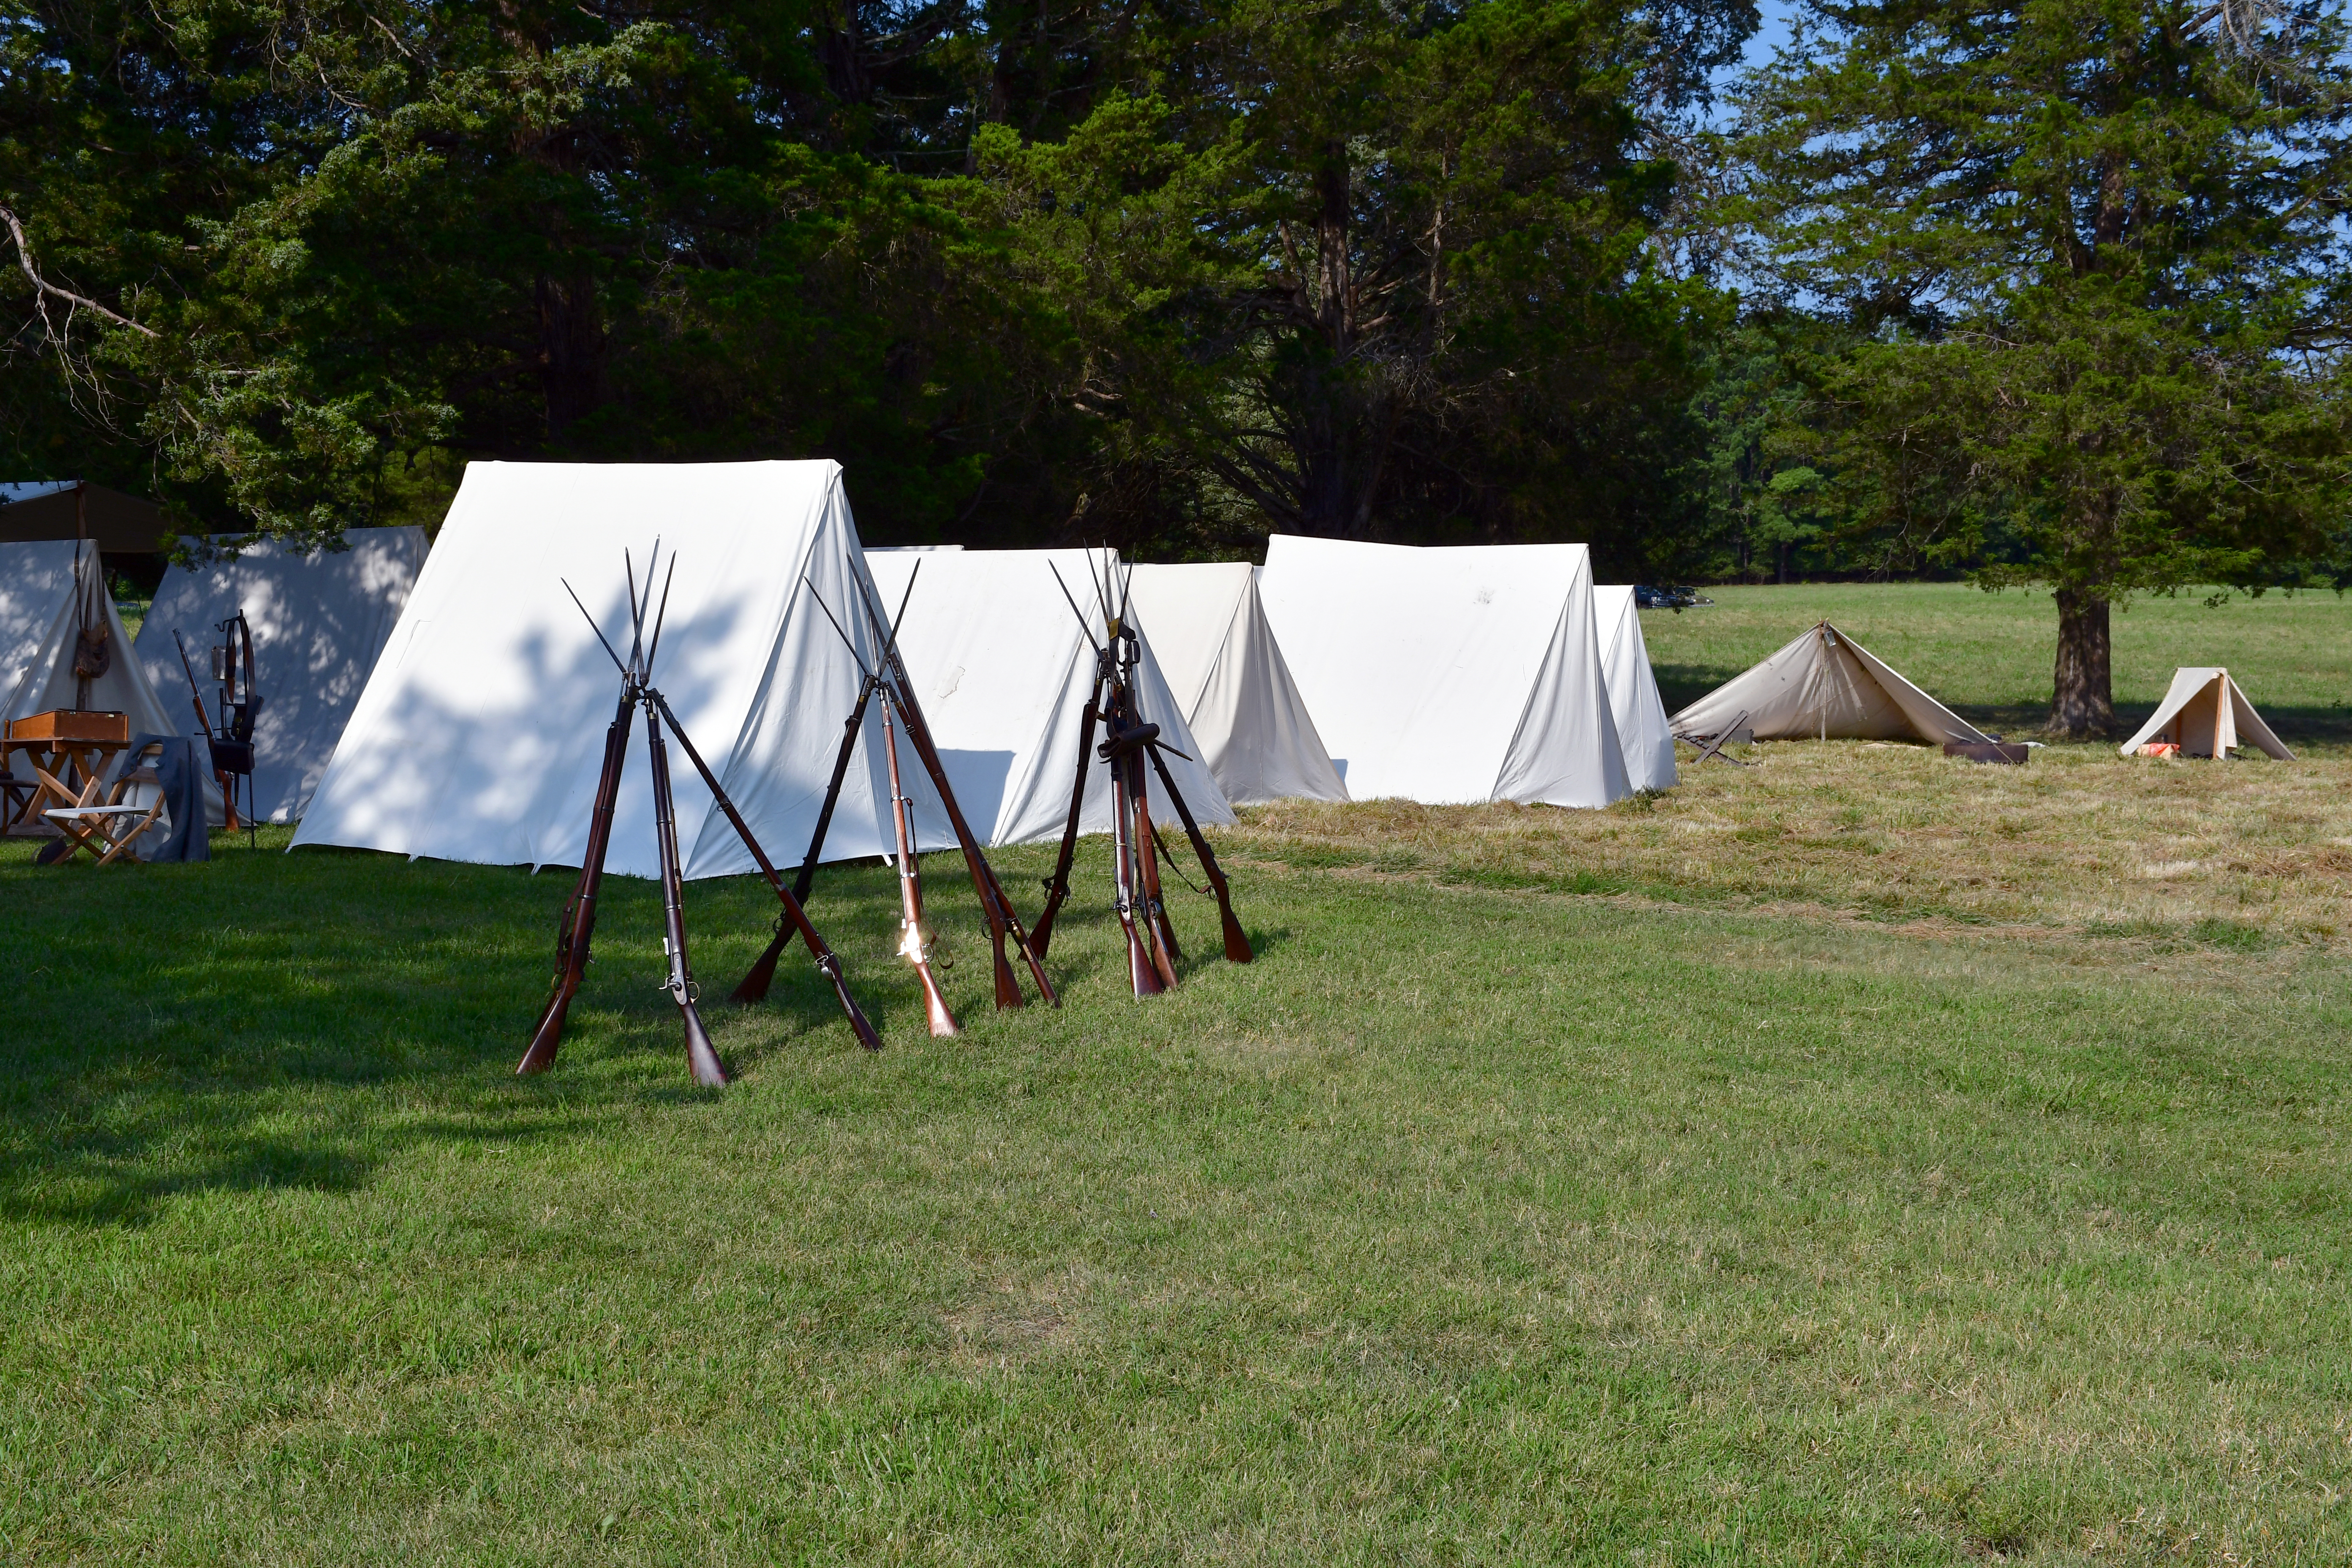 Staked muskets infront of a row of white canvas tents.